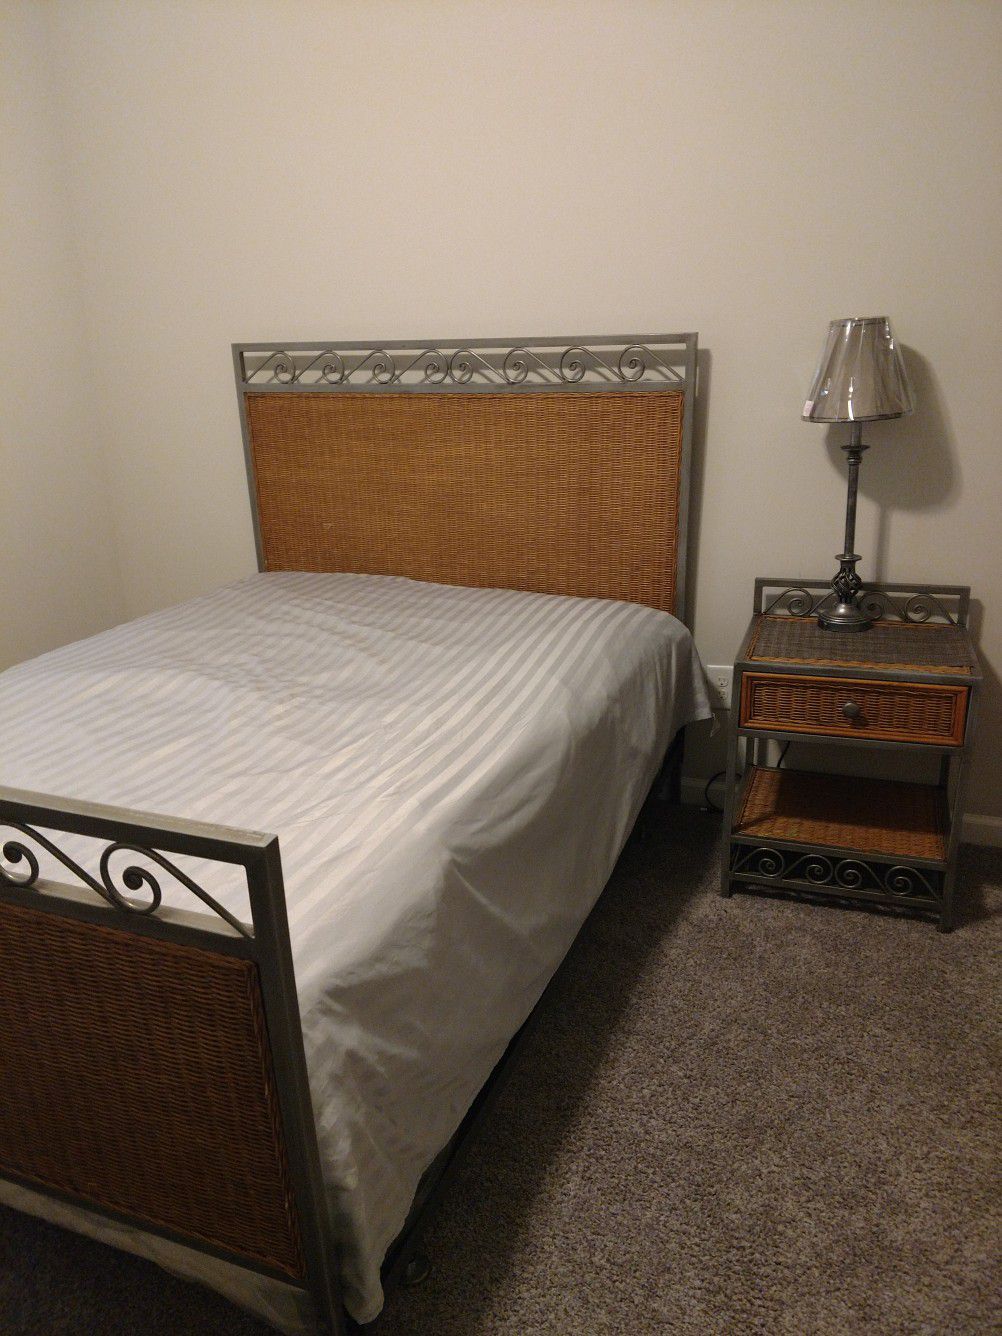 Full size bed frame, night stand and wall mirror